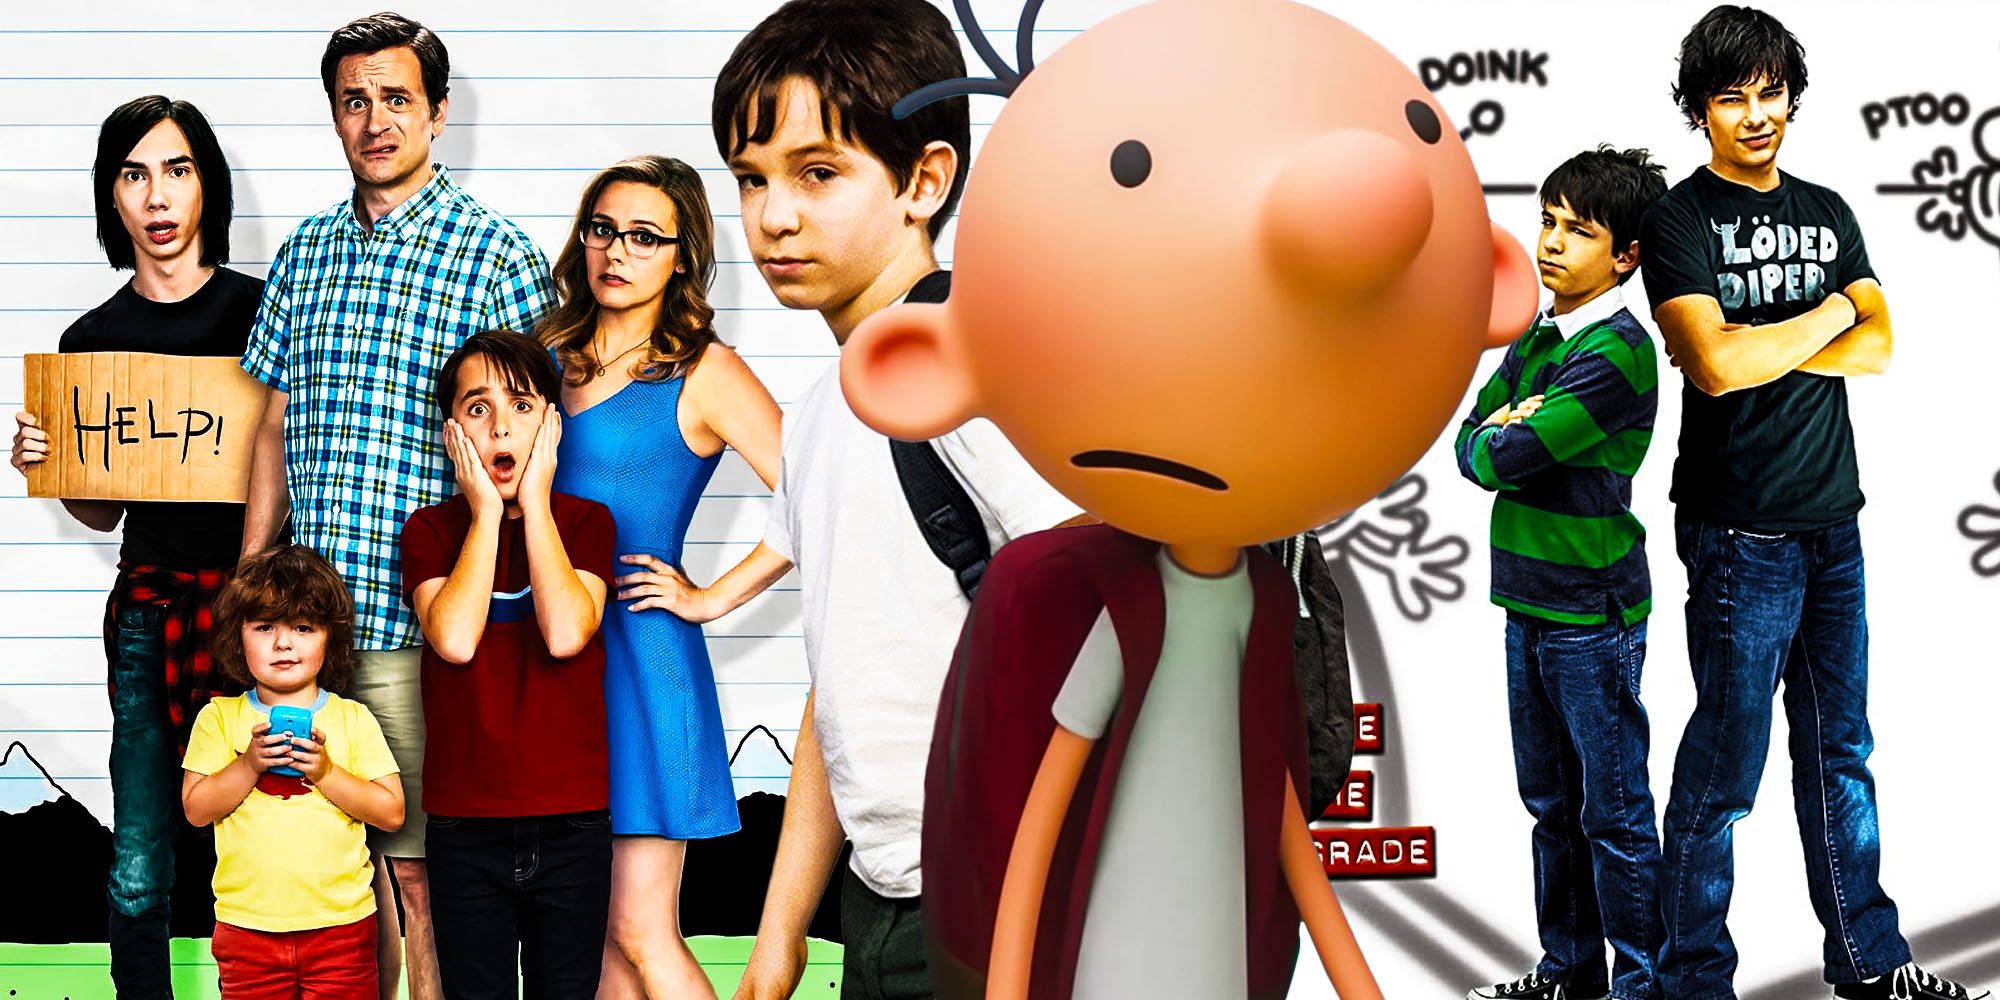 Every Diary of a Wimpy Kid Movie Ranked (Including 2021 Disney+